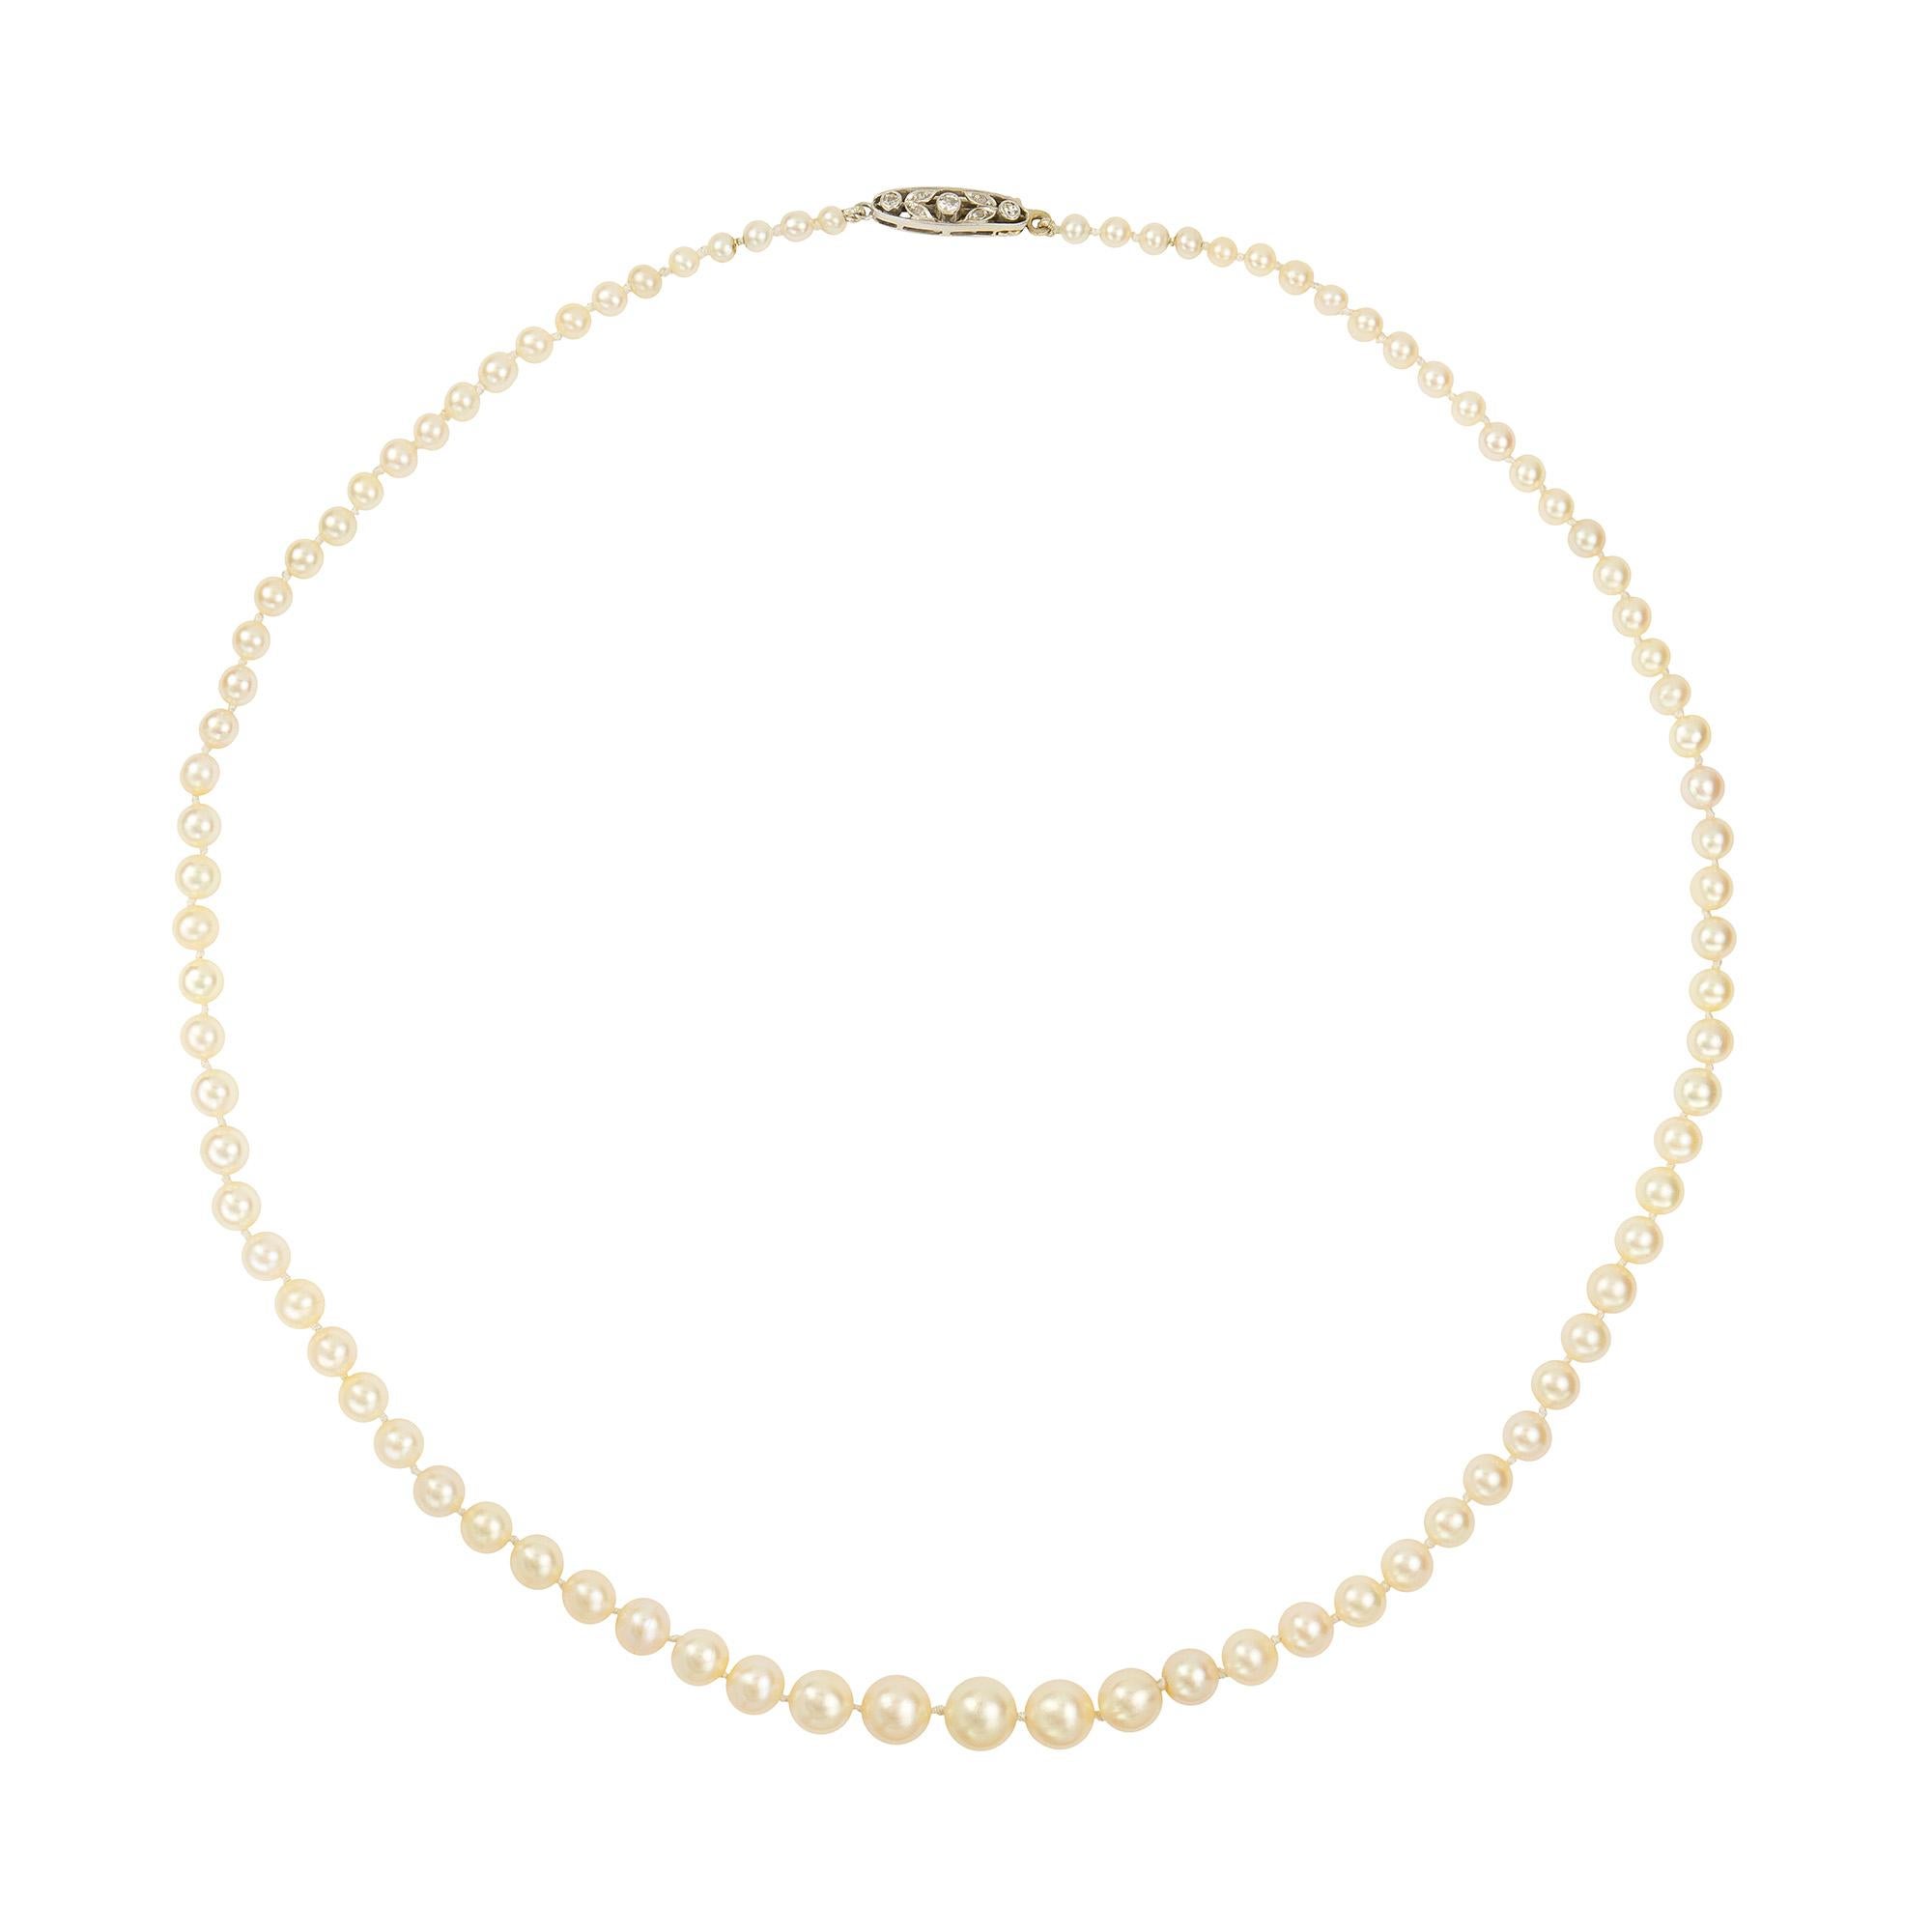 A natural pearl necklace, comprising of eighty-eight graduated natural pearls ranging from 3.25 mm diameter to 7.8 mm, with EE certificate, with diamond-set foliate clasp and safety chain, circa 1910. 
Gross weight 17.28 grams

Should you choose to